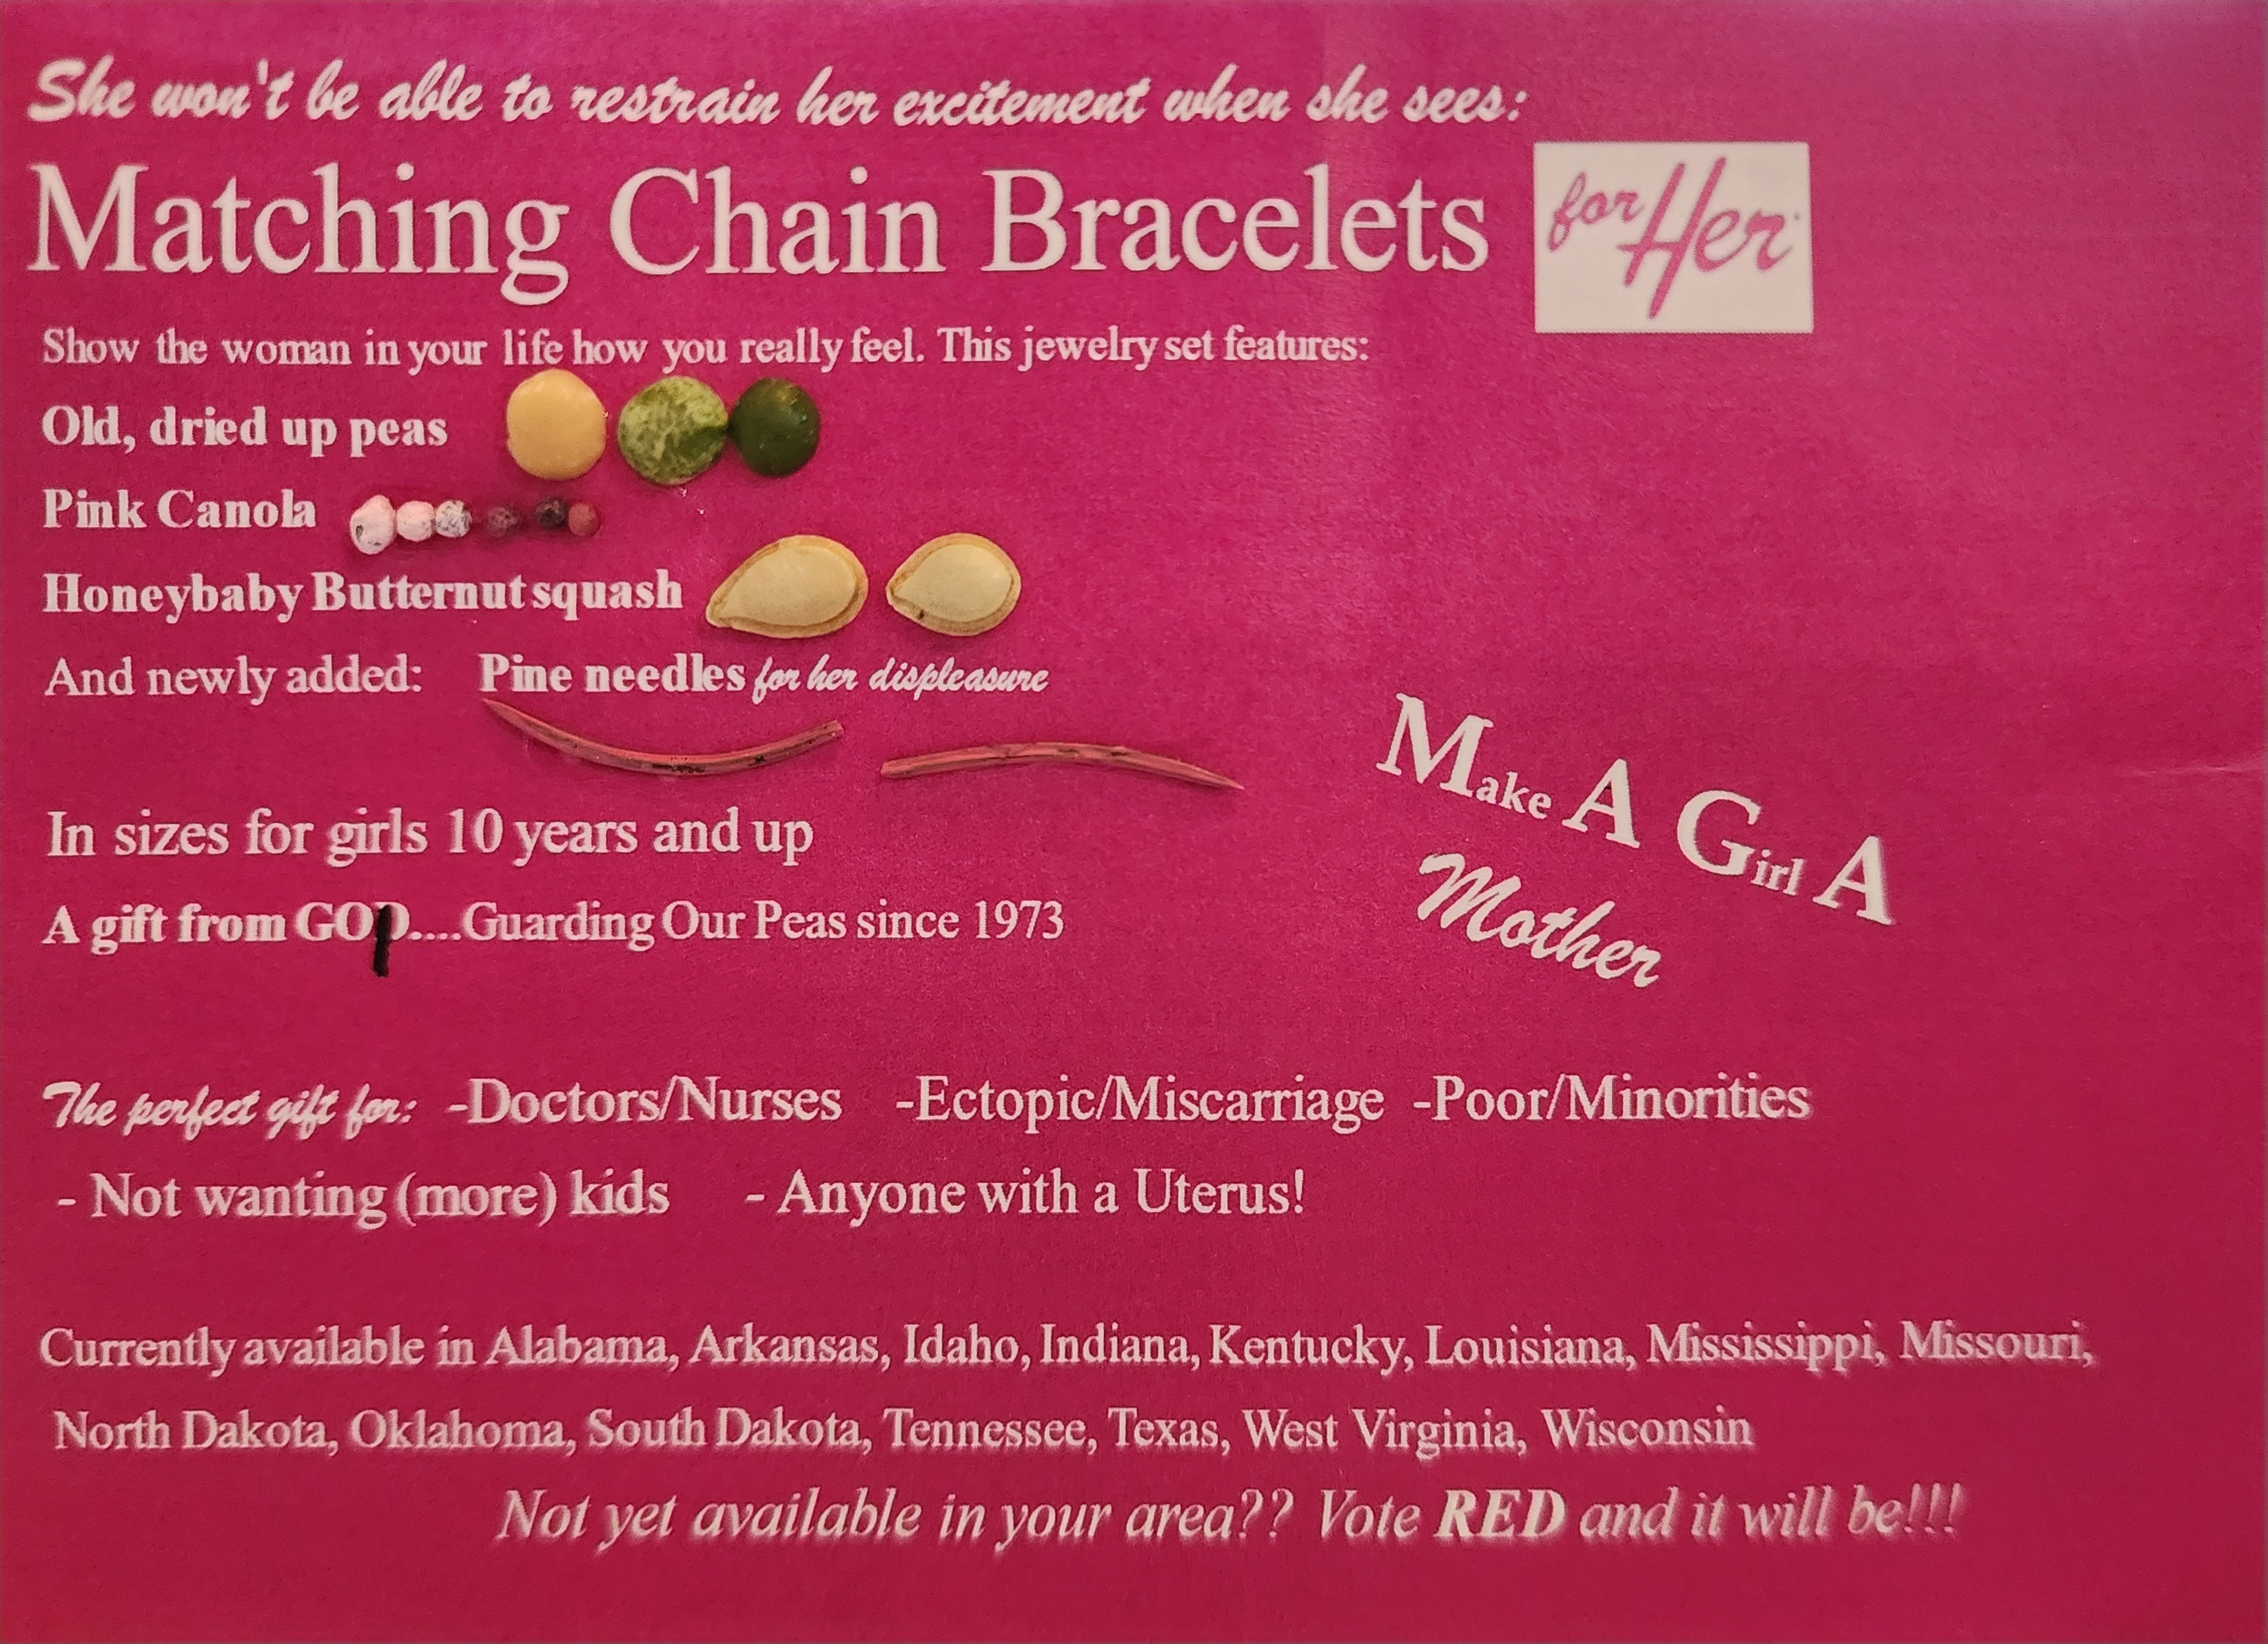 [Annie Wu Mann Matching Chain Bracelets for Her Index Card image]